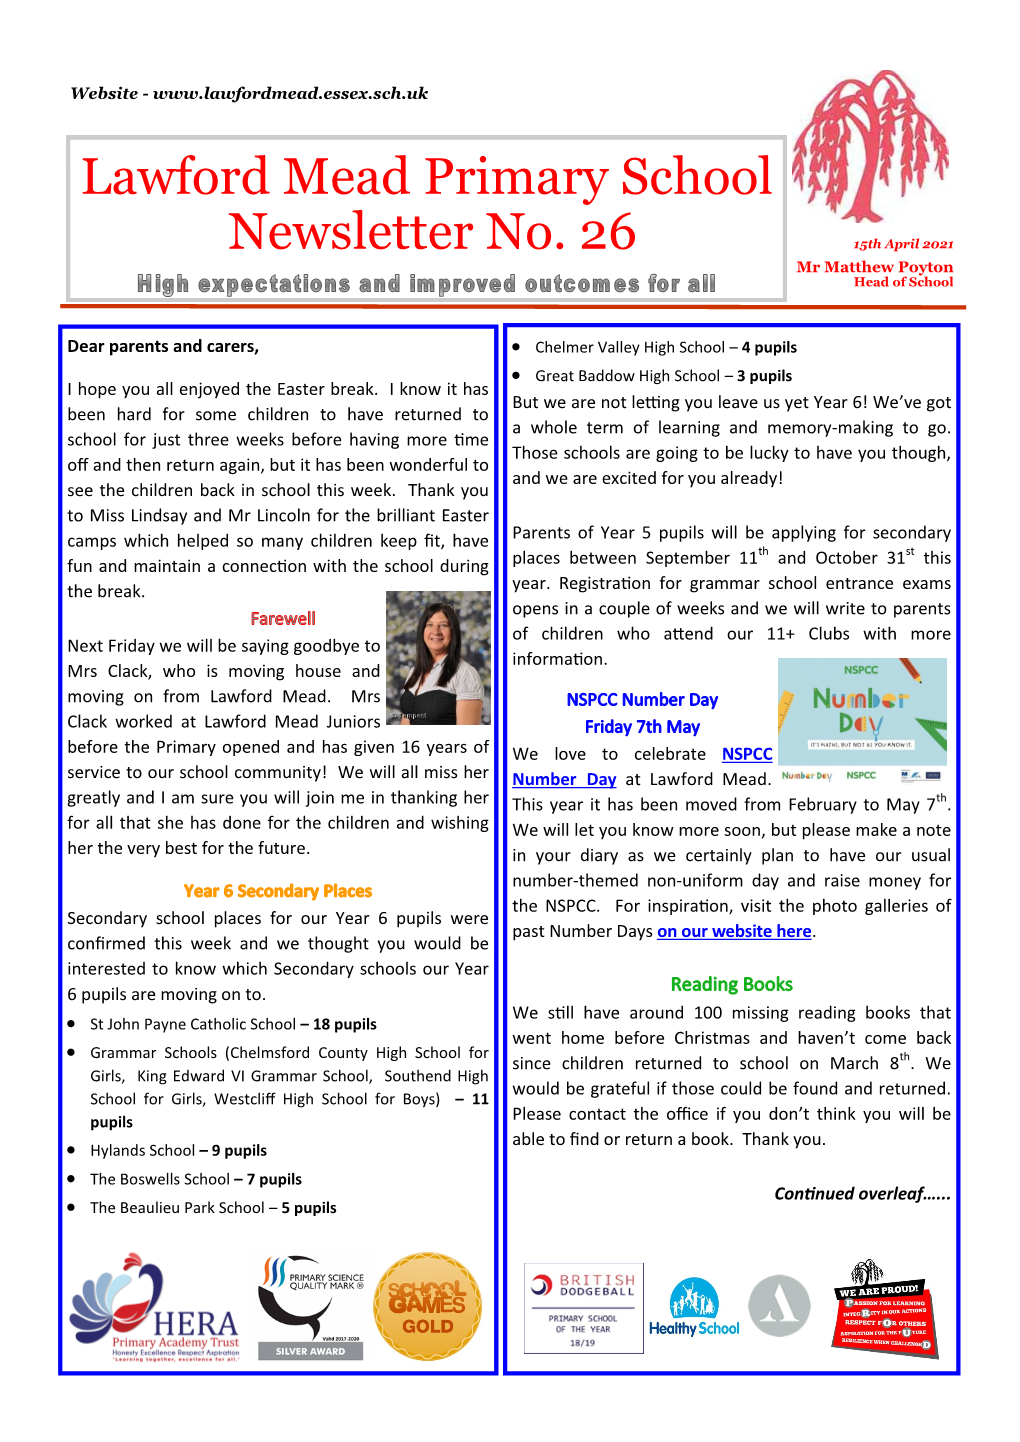 Lawford Mead Primary School Newsletter No. 26